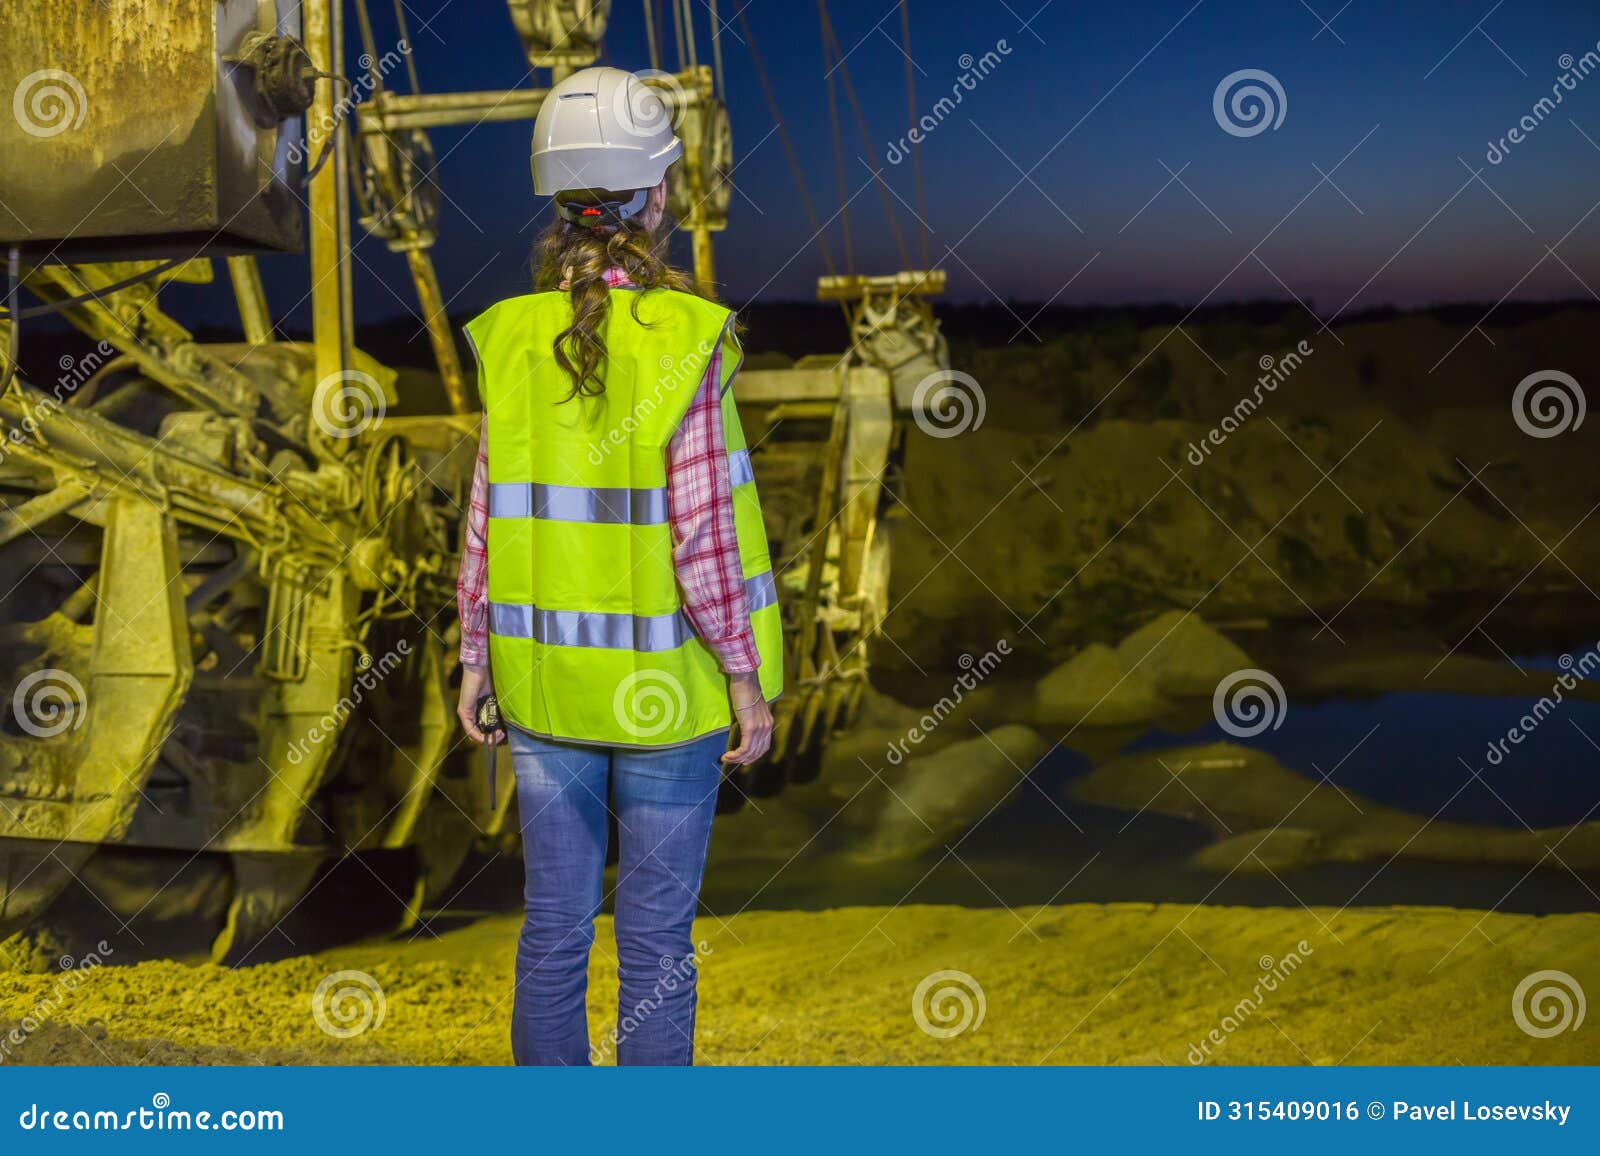 female worker lookis at sandpit on backgroud of